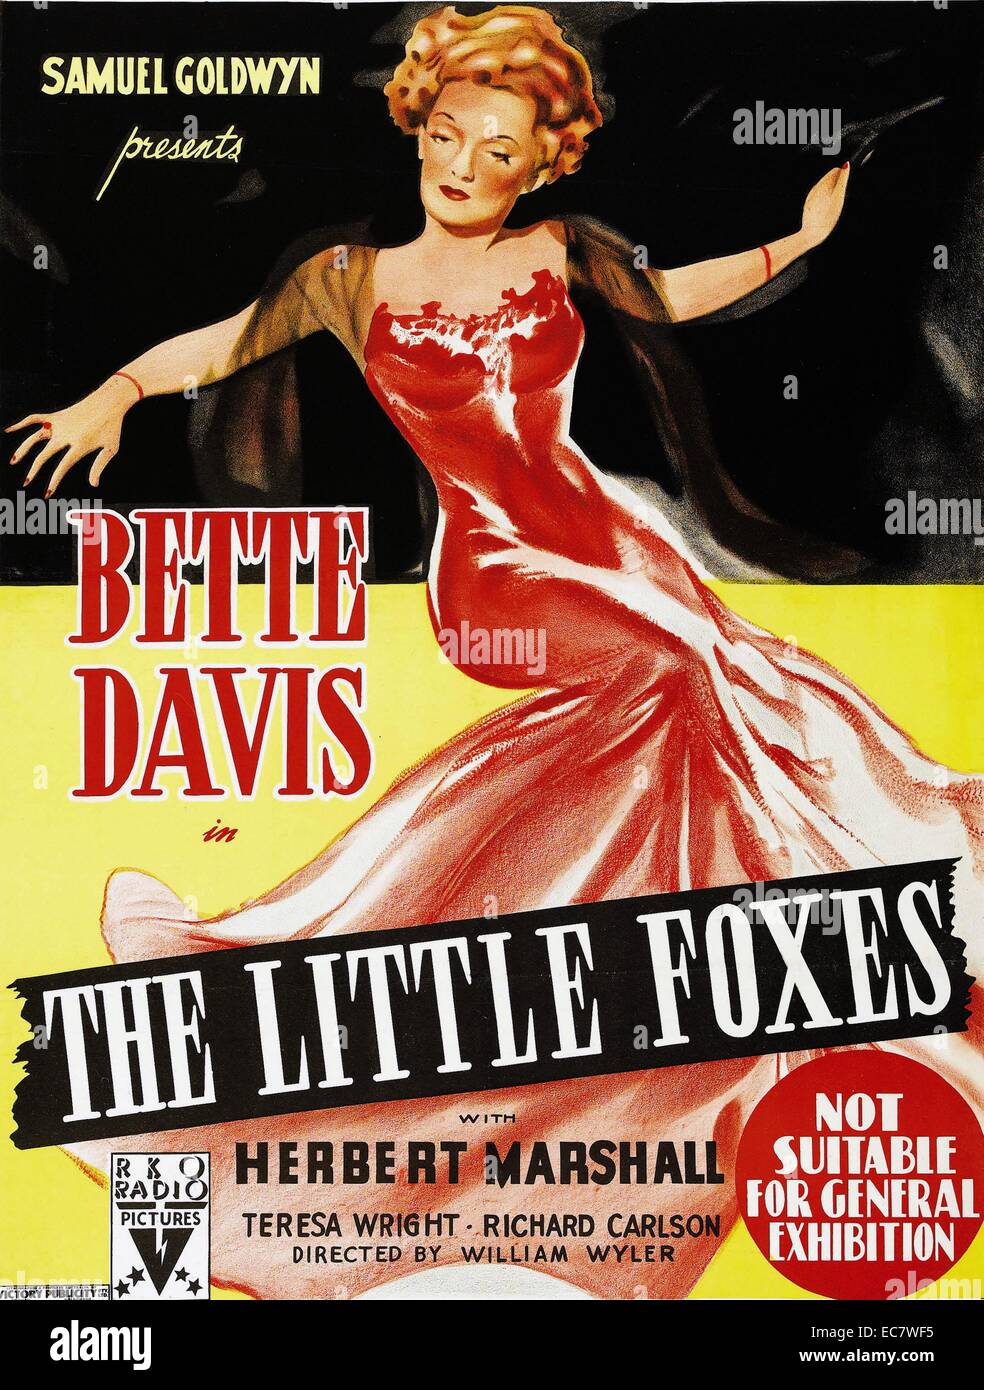 The Little Foxes, 1941, is an American drama film directed by William Wyler. The screenplay by Lillian Hellman is based on her 1939 play of the same name. Starring Bette Davis, Herbert Marshall and Teresa Wright. Stock Photo